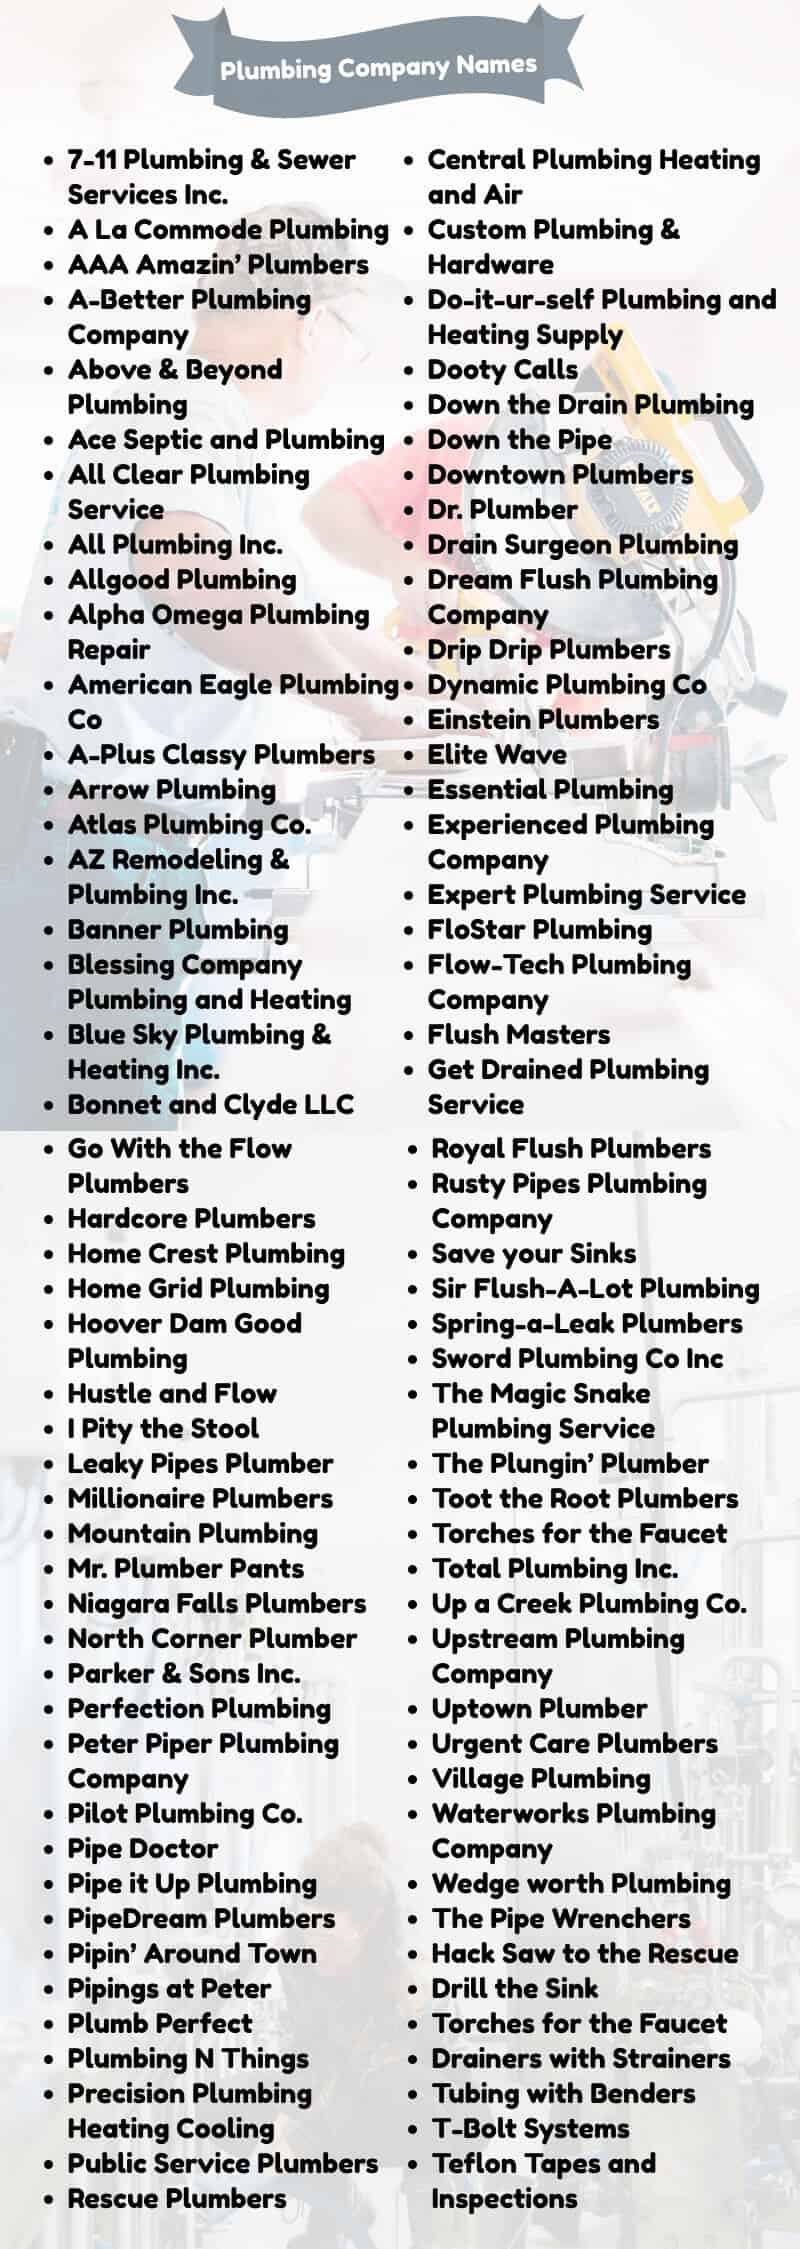 These are Catchy Plumbing Company Names